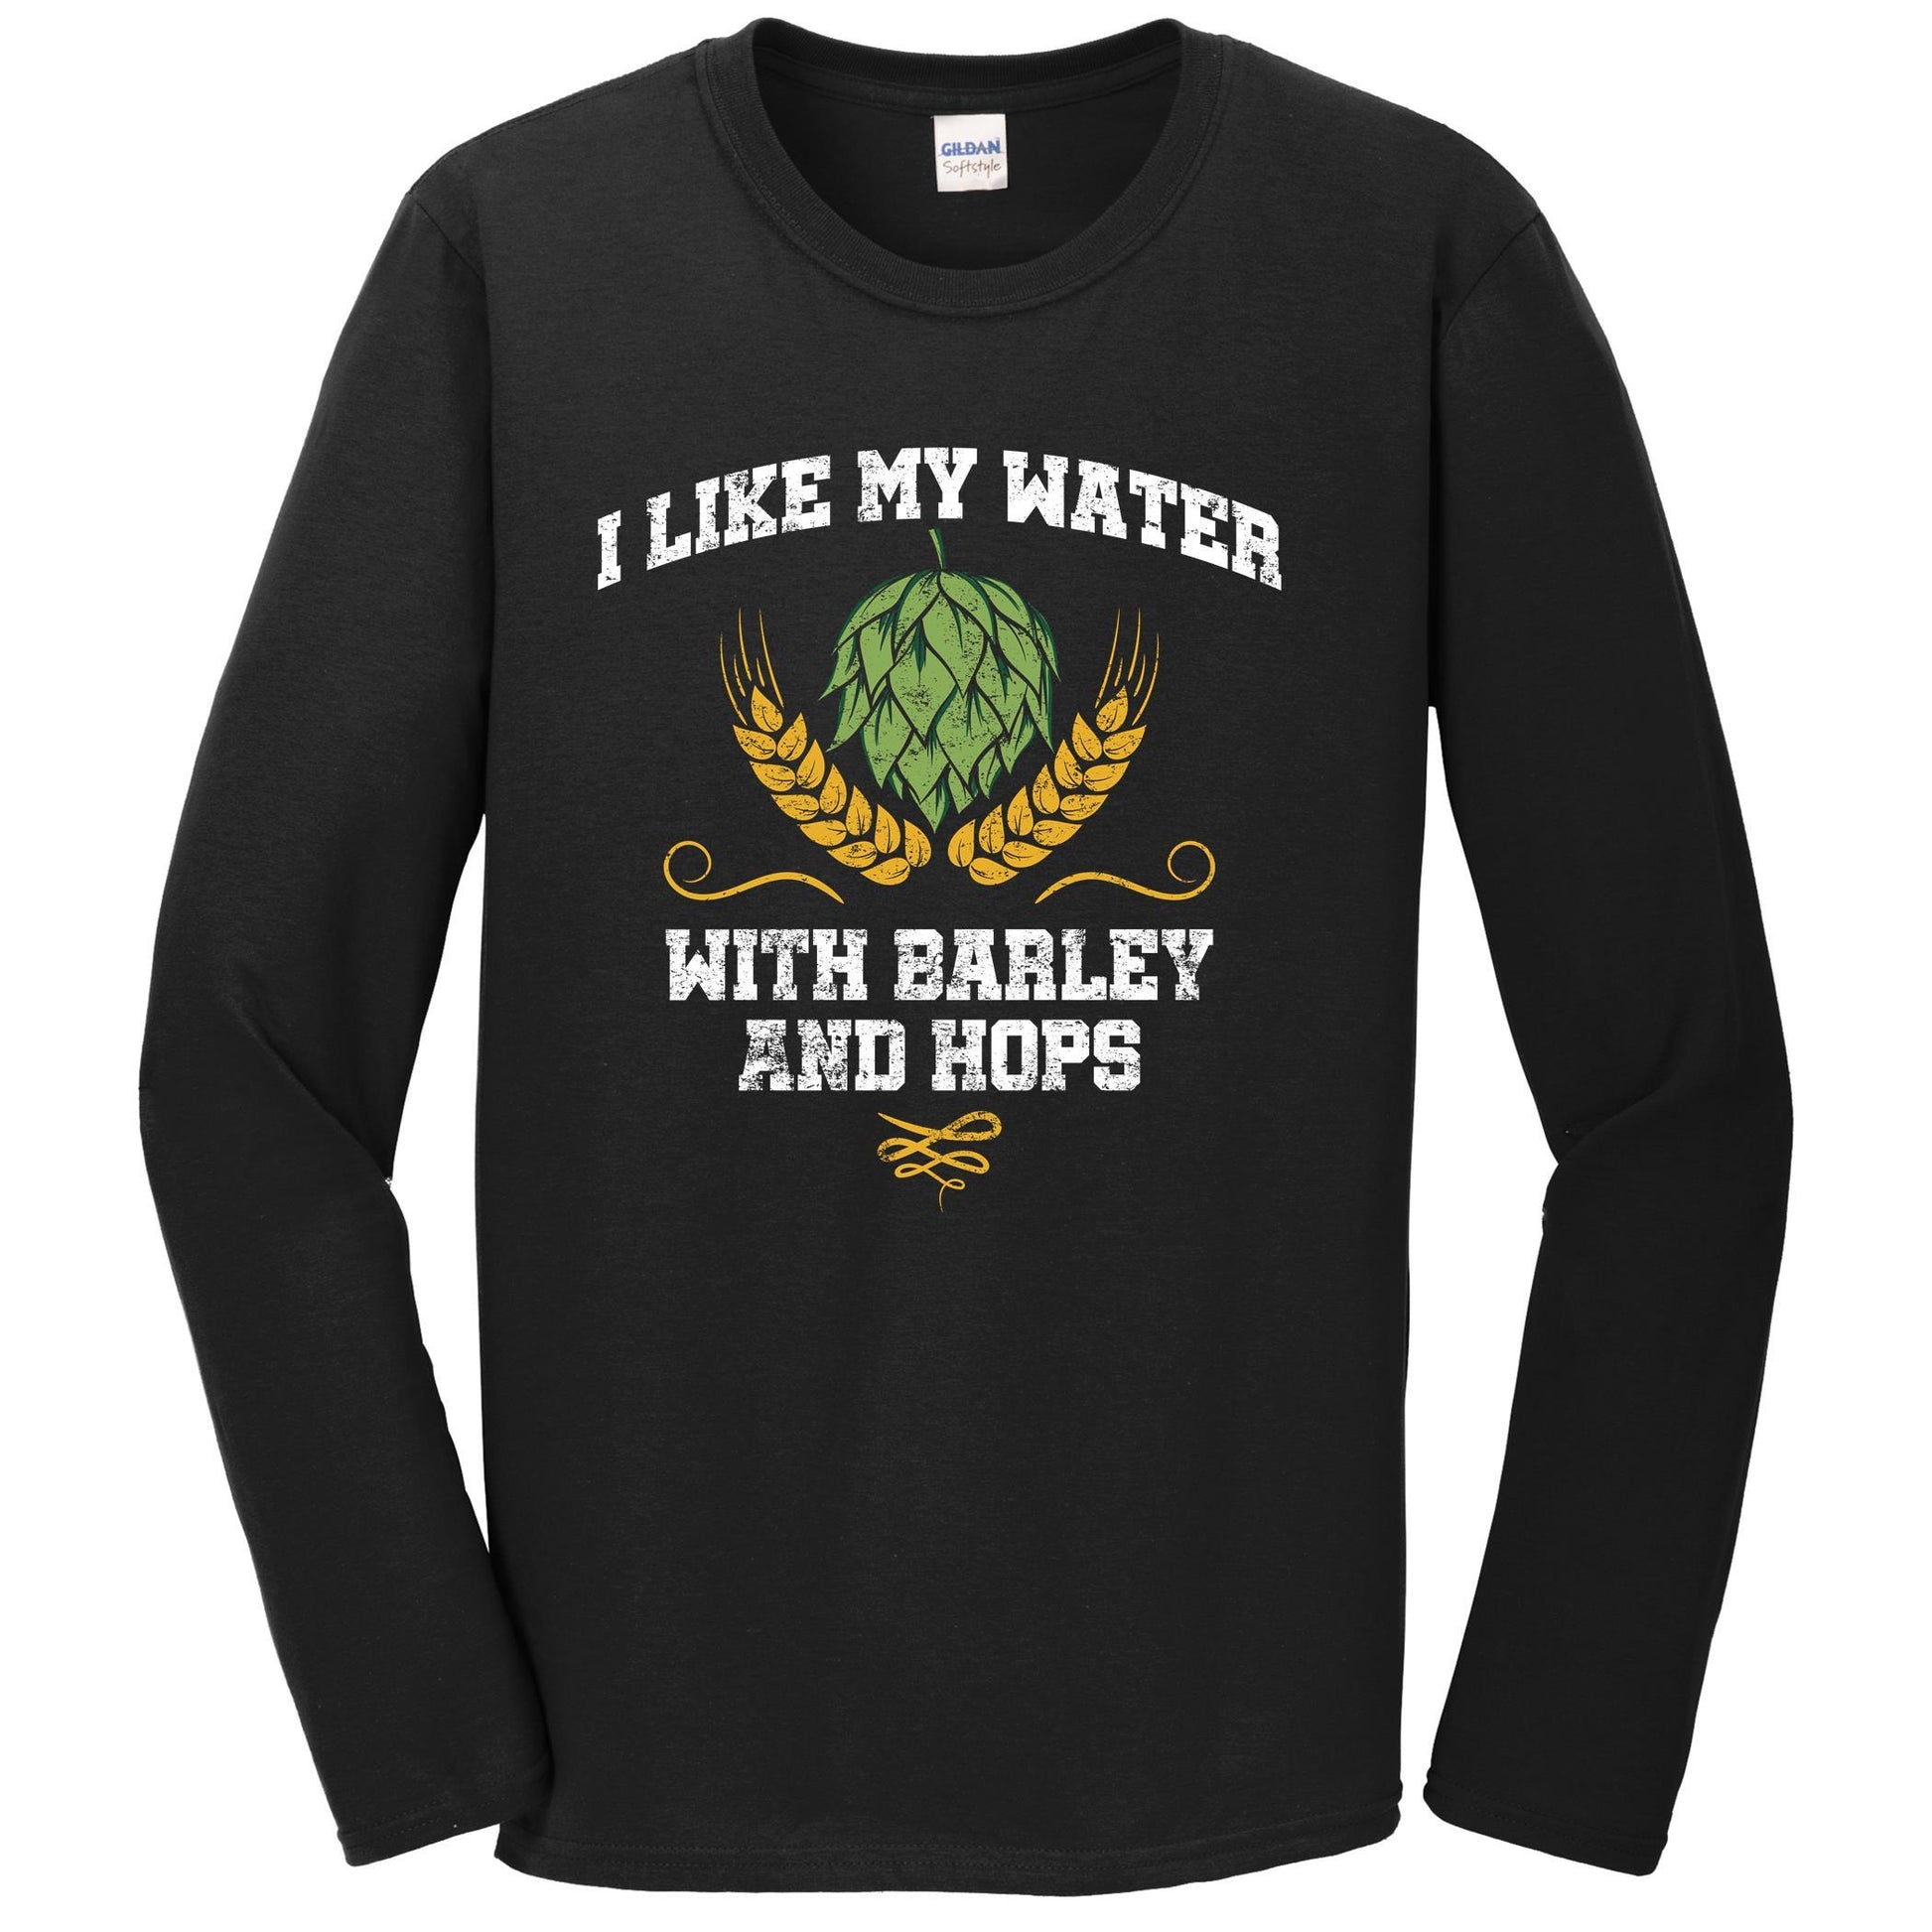 I Like My Water With Barley And Hops Funny Craft Beer Long Sleeve Shirt